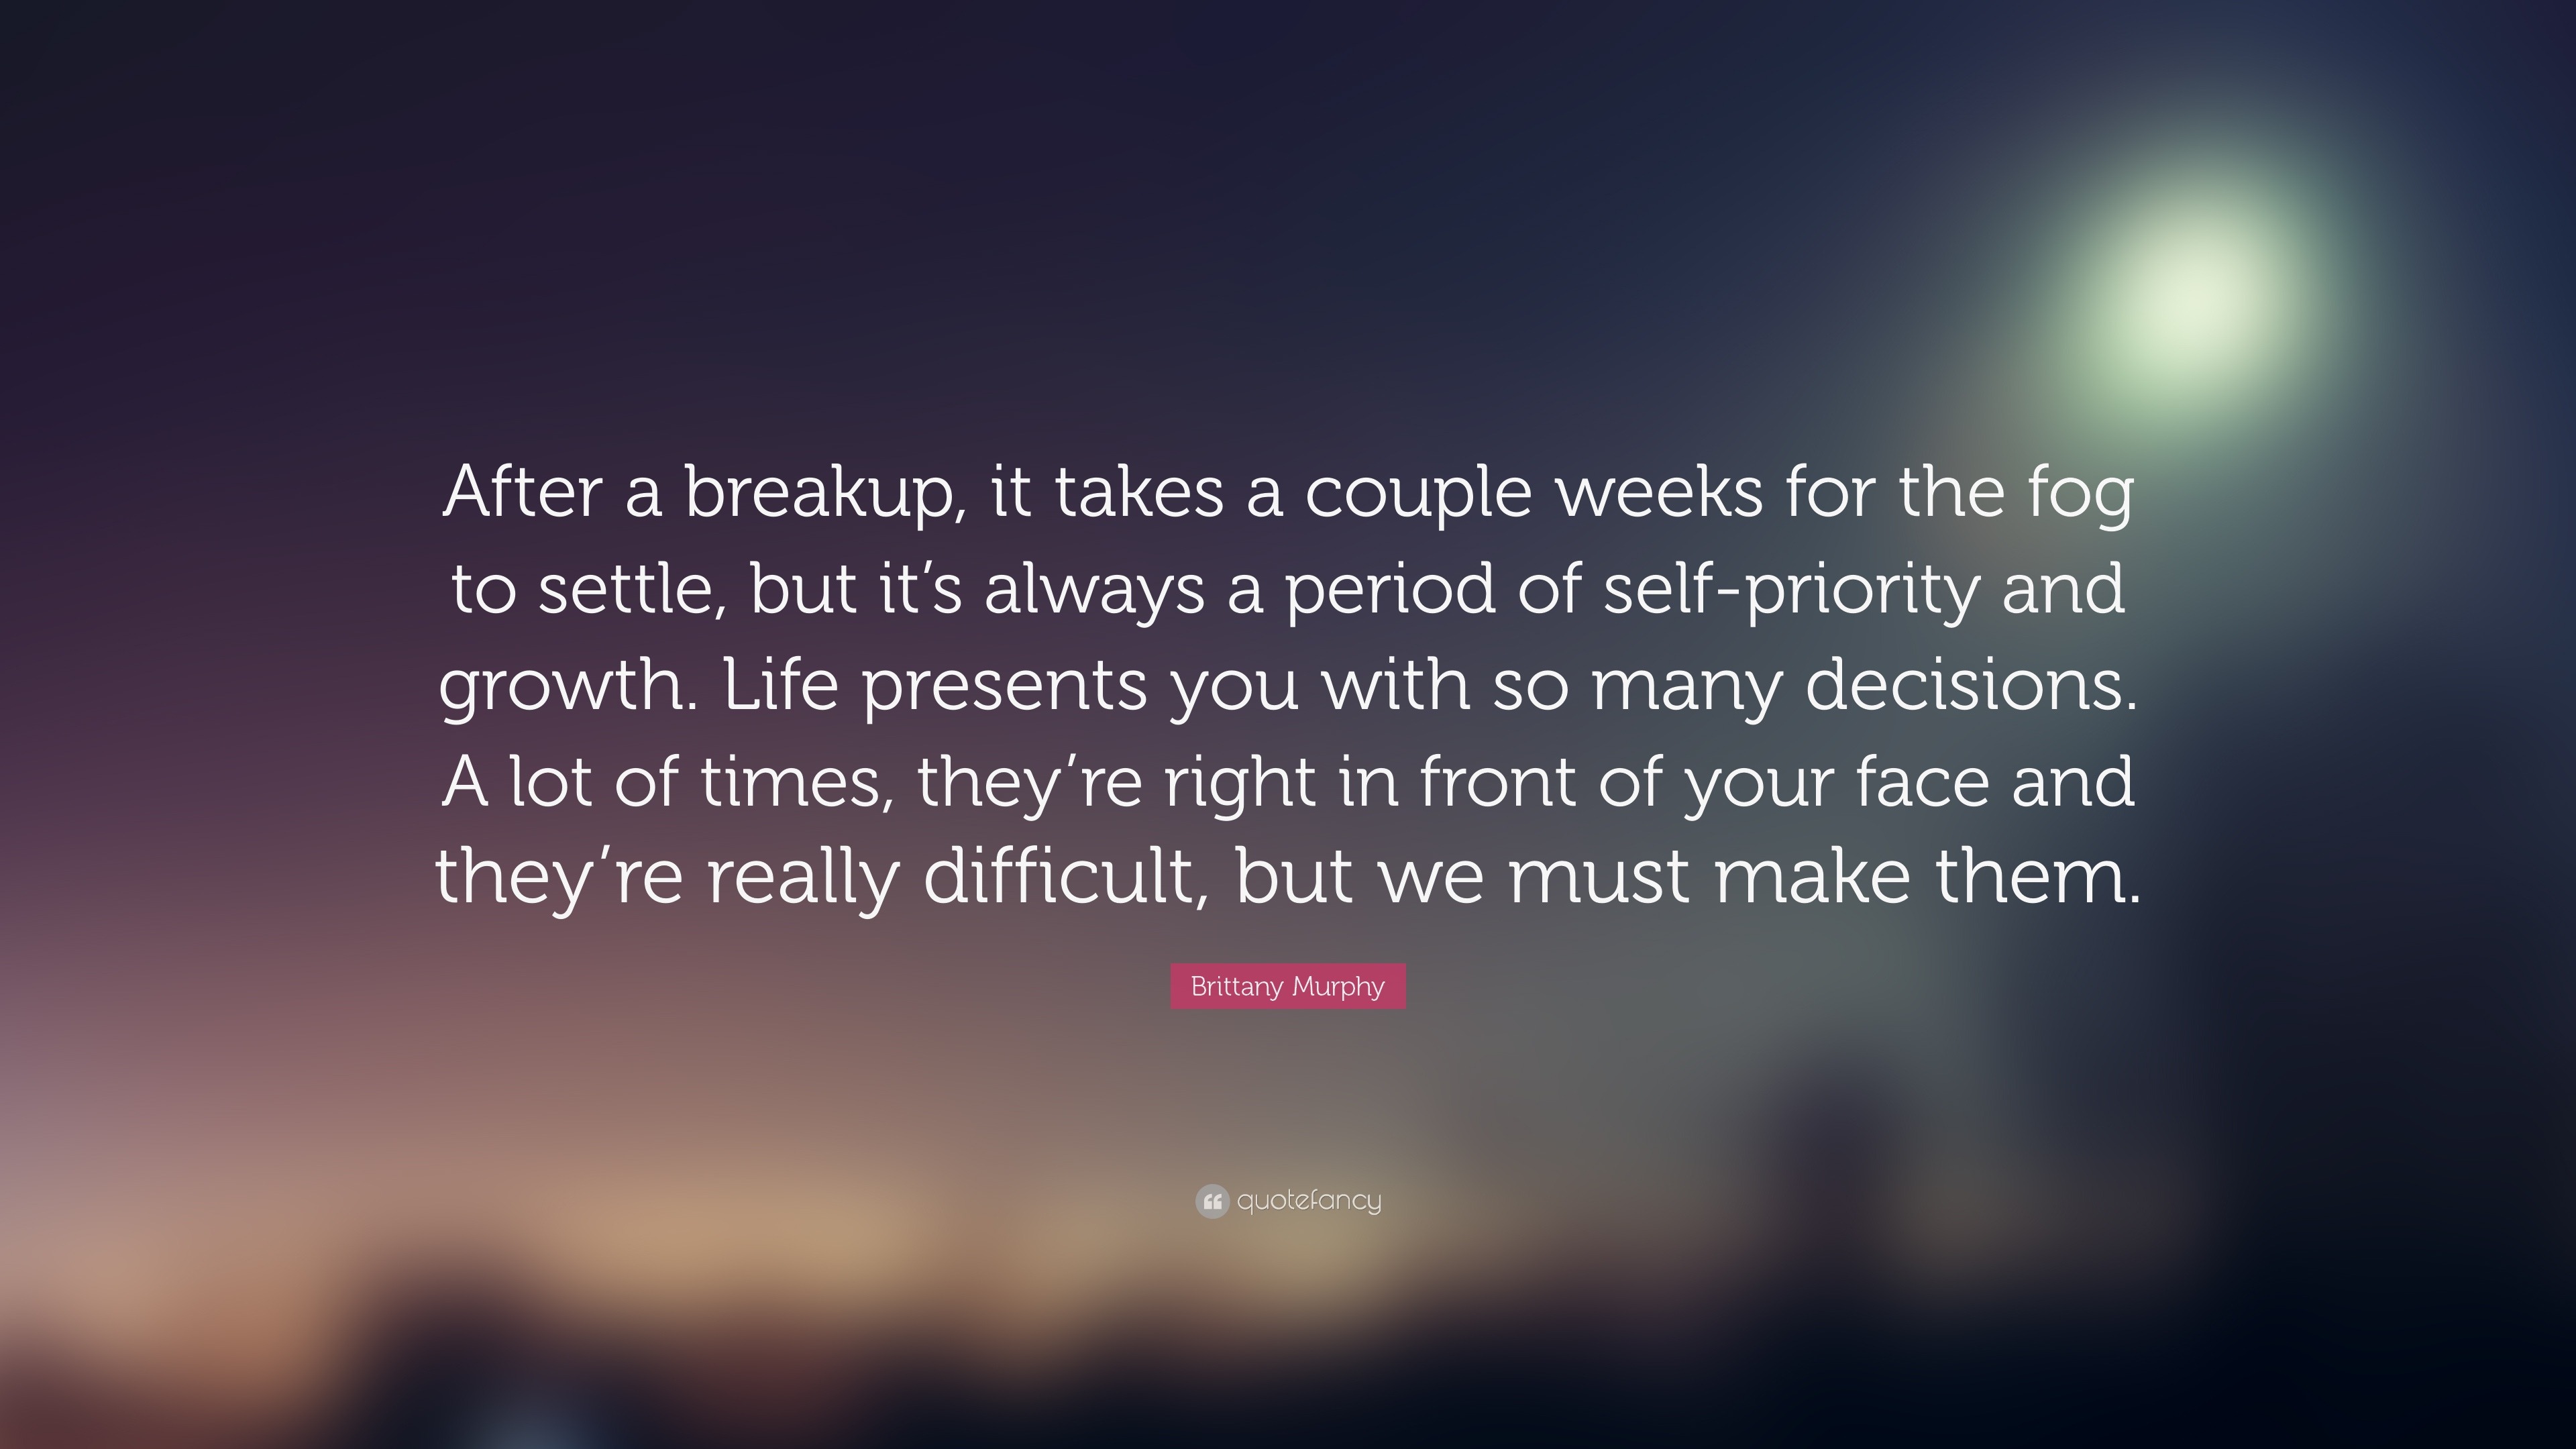 Brittany Murphy Quote: "After a breakup, it takes a couple weeks for the fog to settle, but it's ...